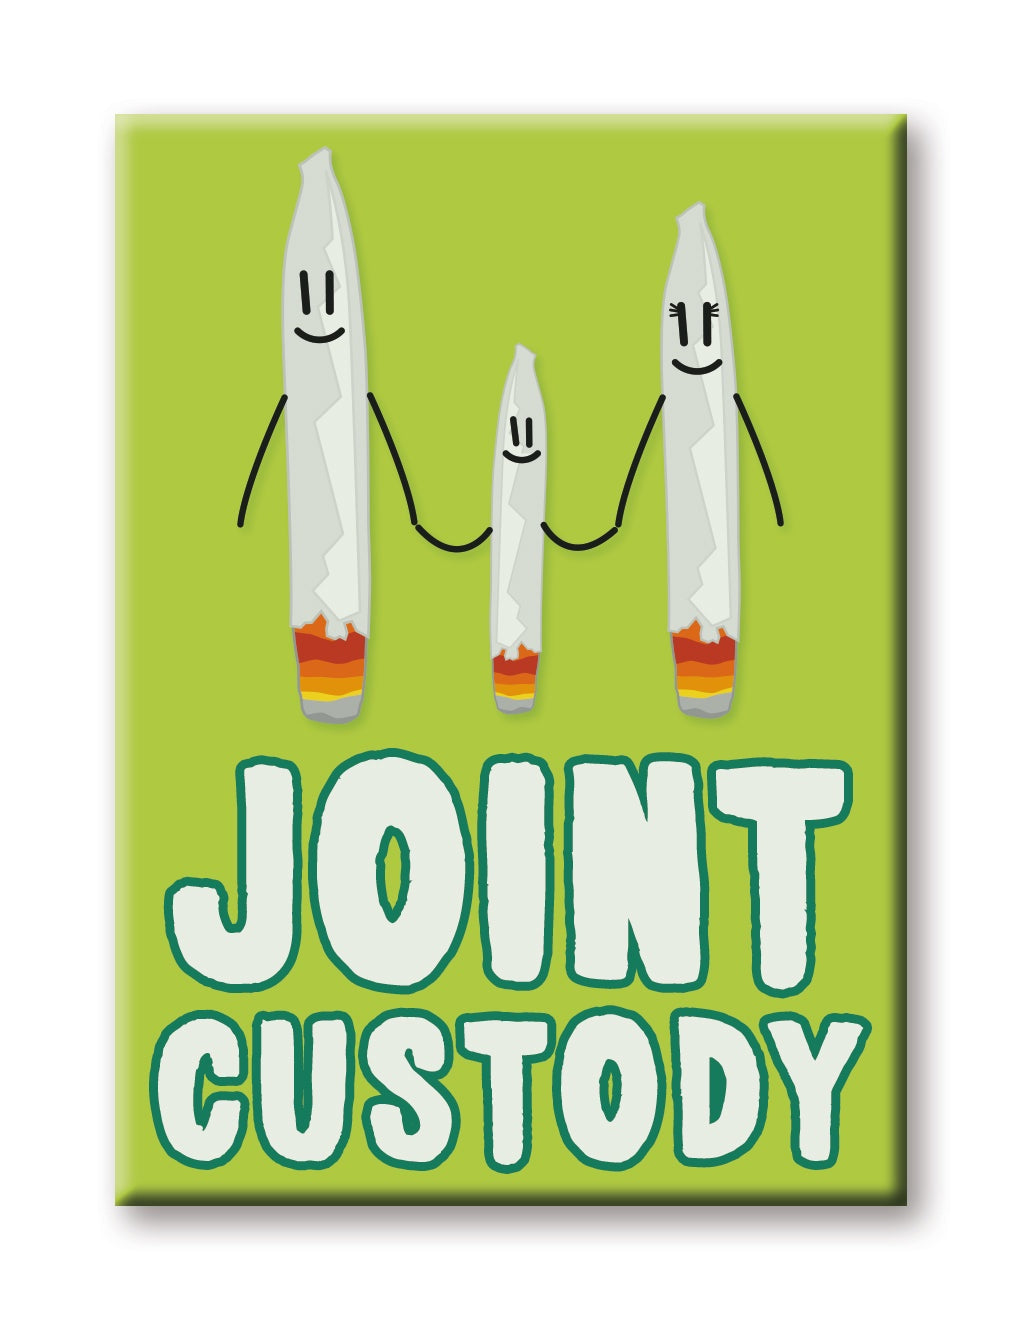 Weed Joint Custody Magnet